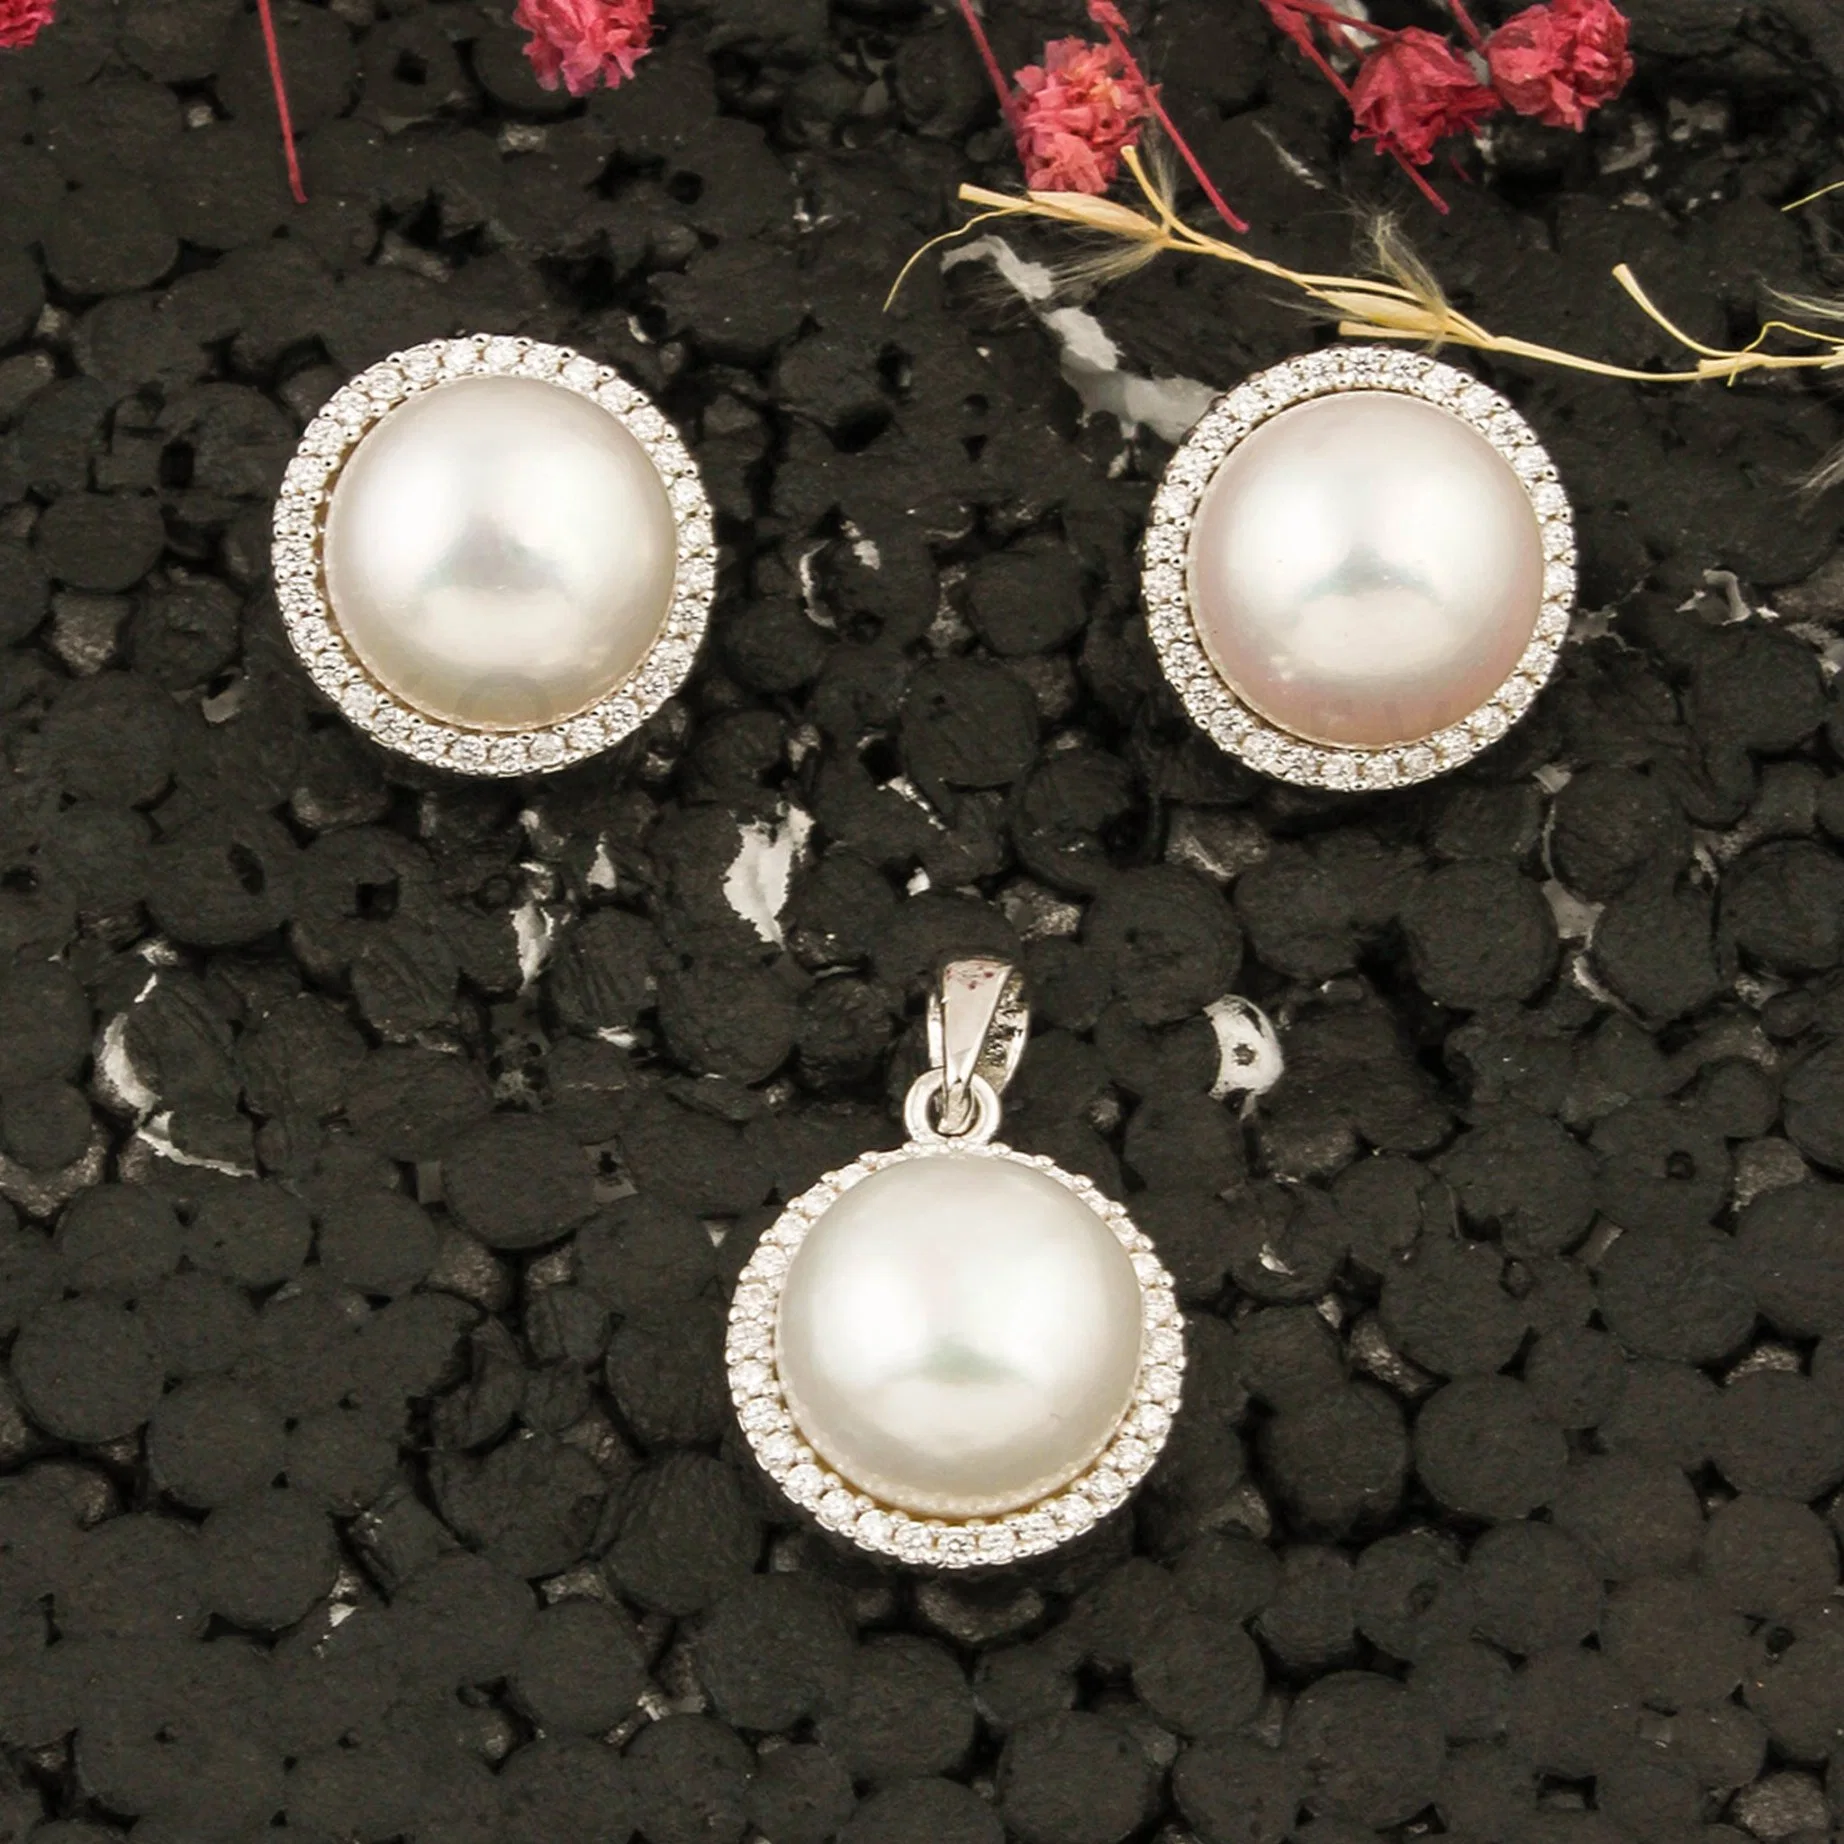 The Arsia Vintage Pearl 925 Sterling Silver Earrings Pendant Jewelry Set